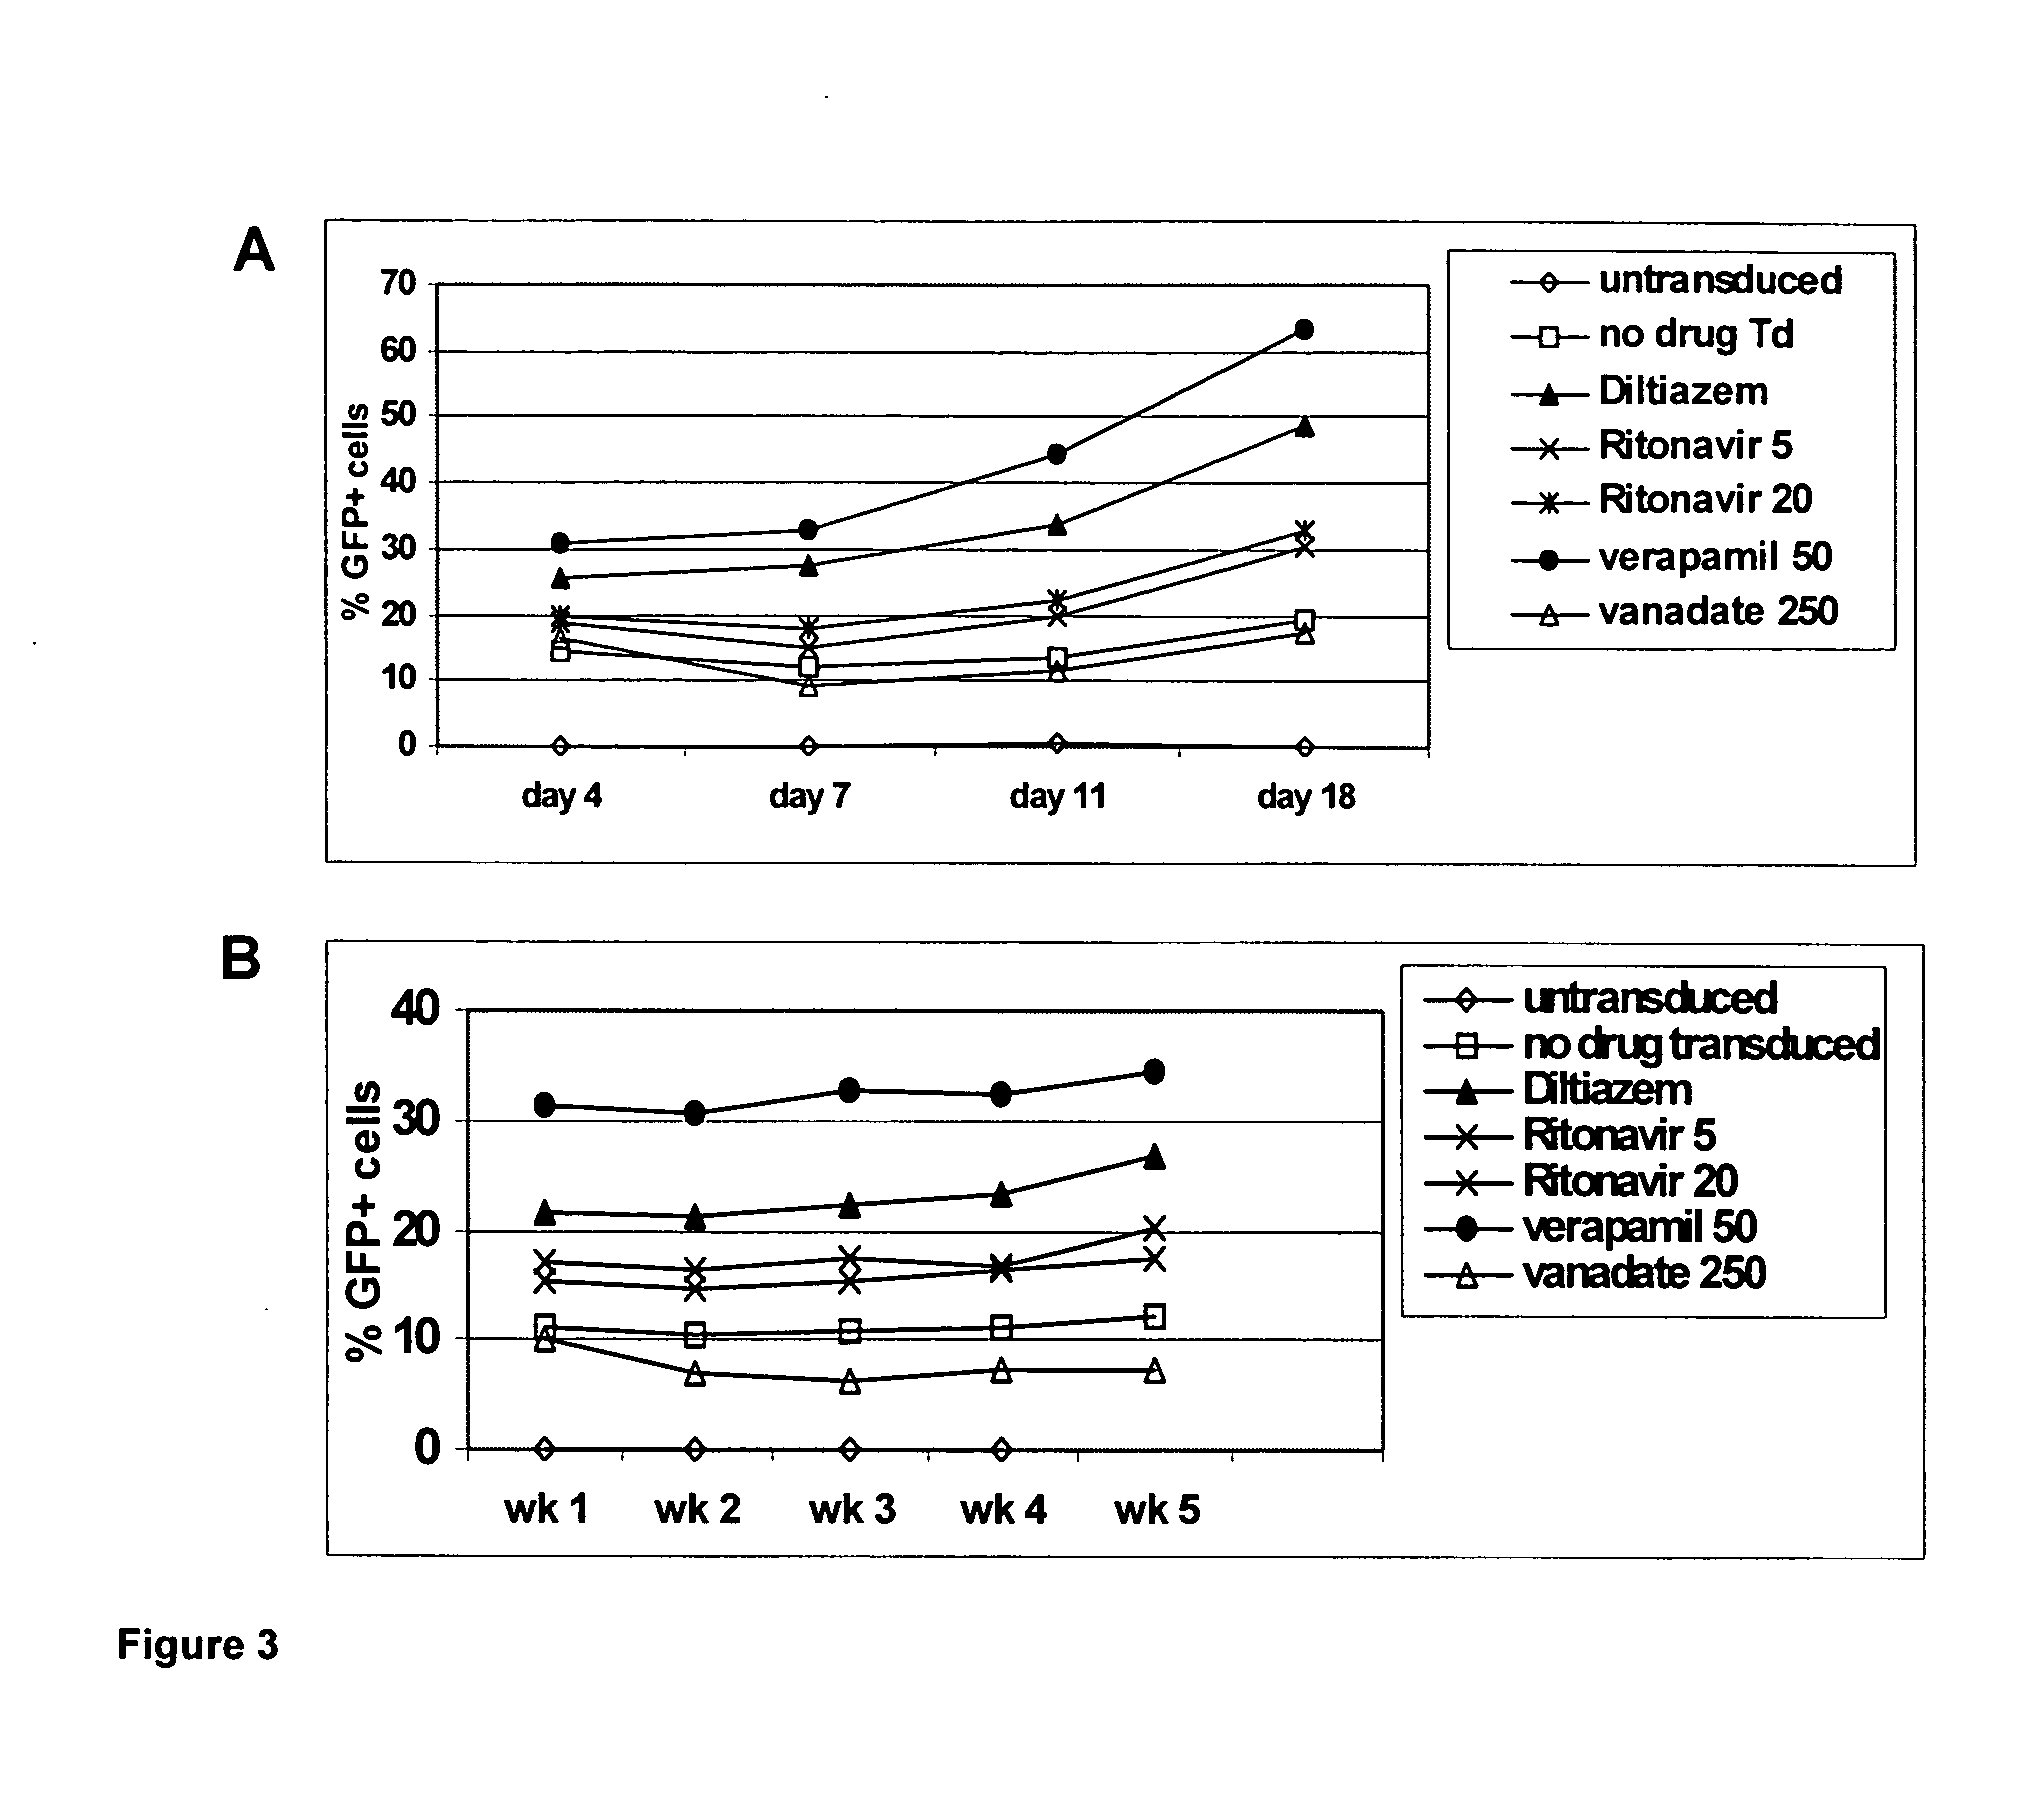 Increased transduction using ABC transporter substrates and/or inhibitors